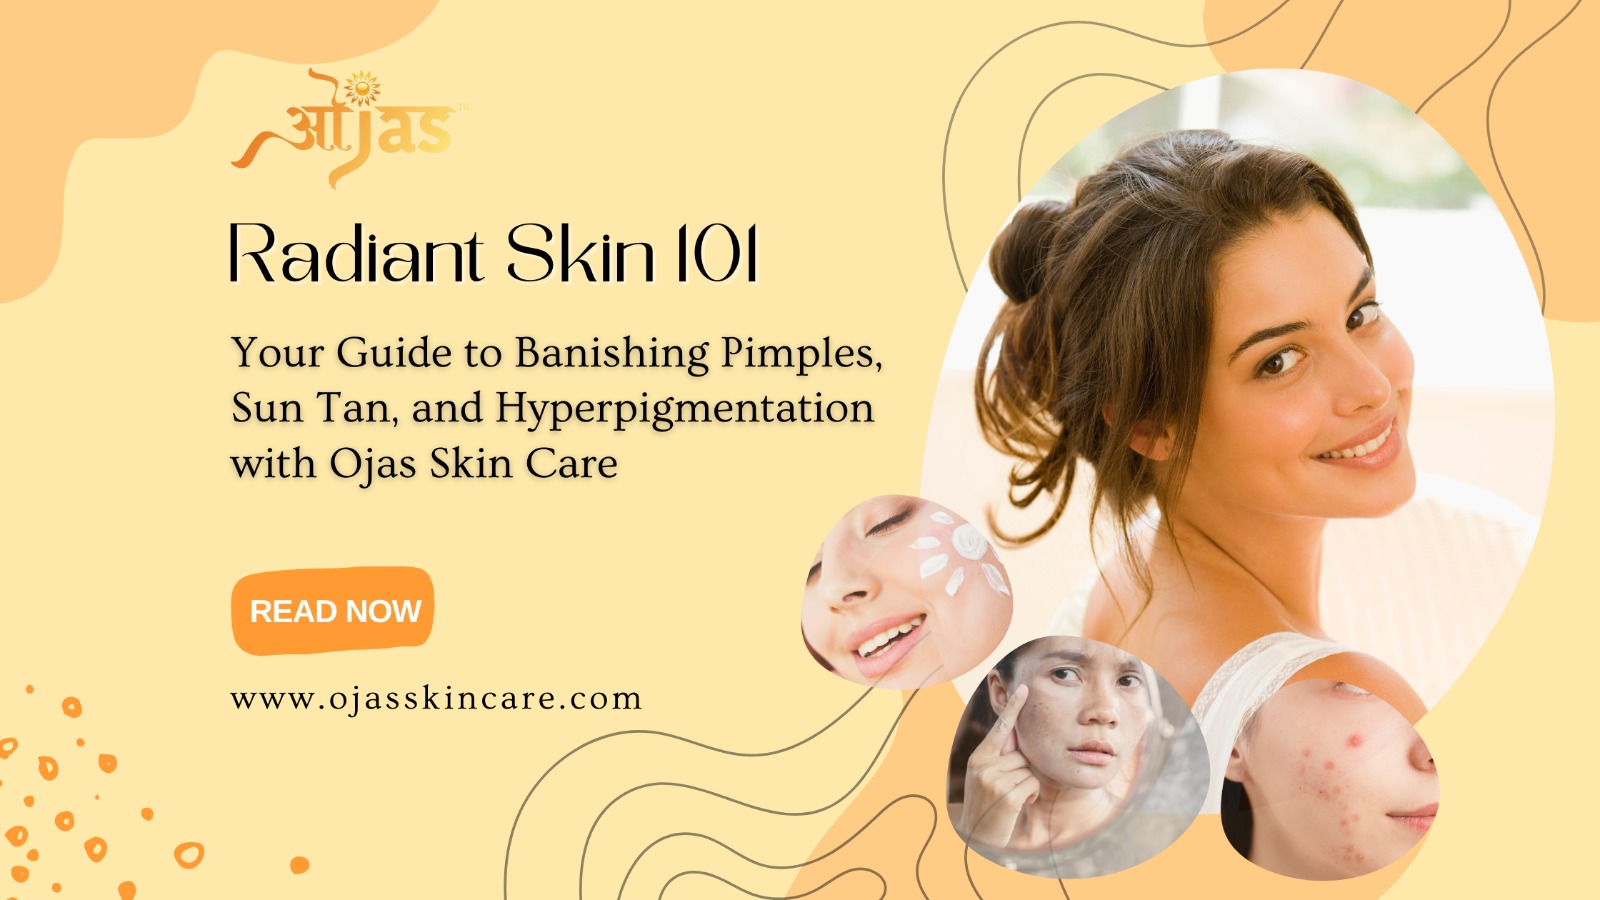 Radiant Skin 101 Your Guide To Banishing Pimples, Sun Tan, And Hyperpigmentation